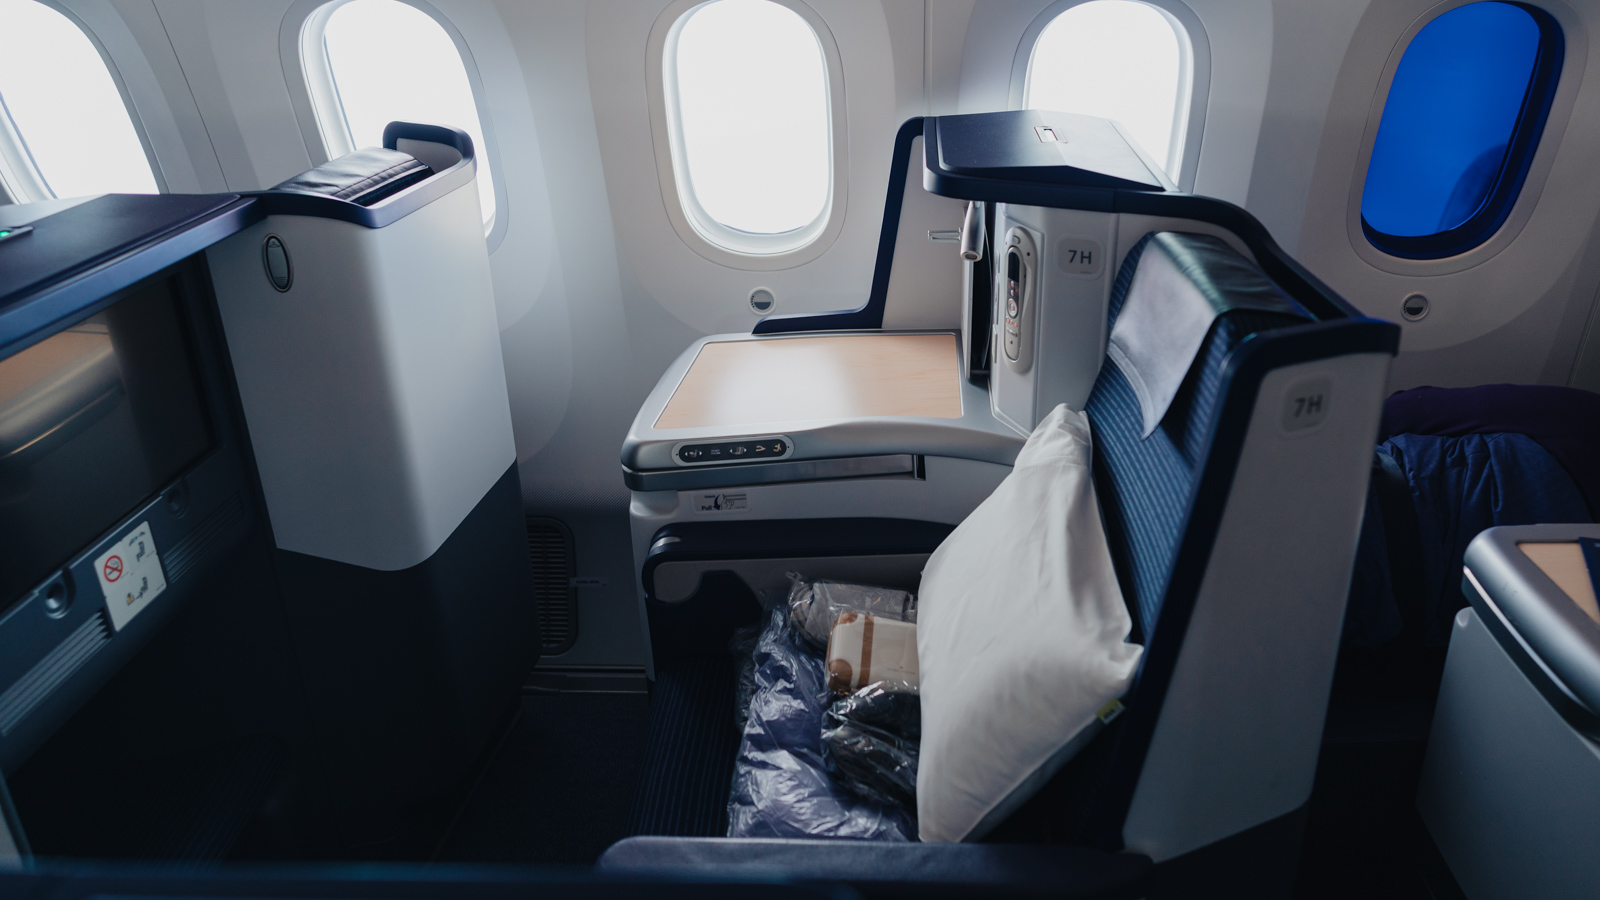 ANA Boeing 787-9 Business Class aisle seat